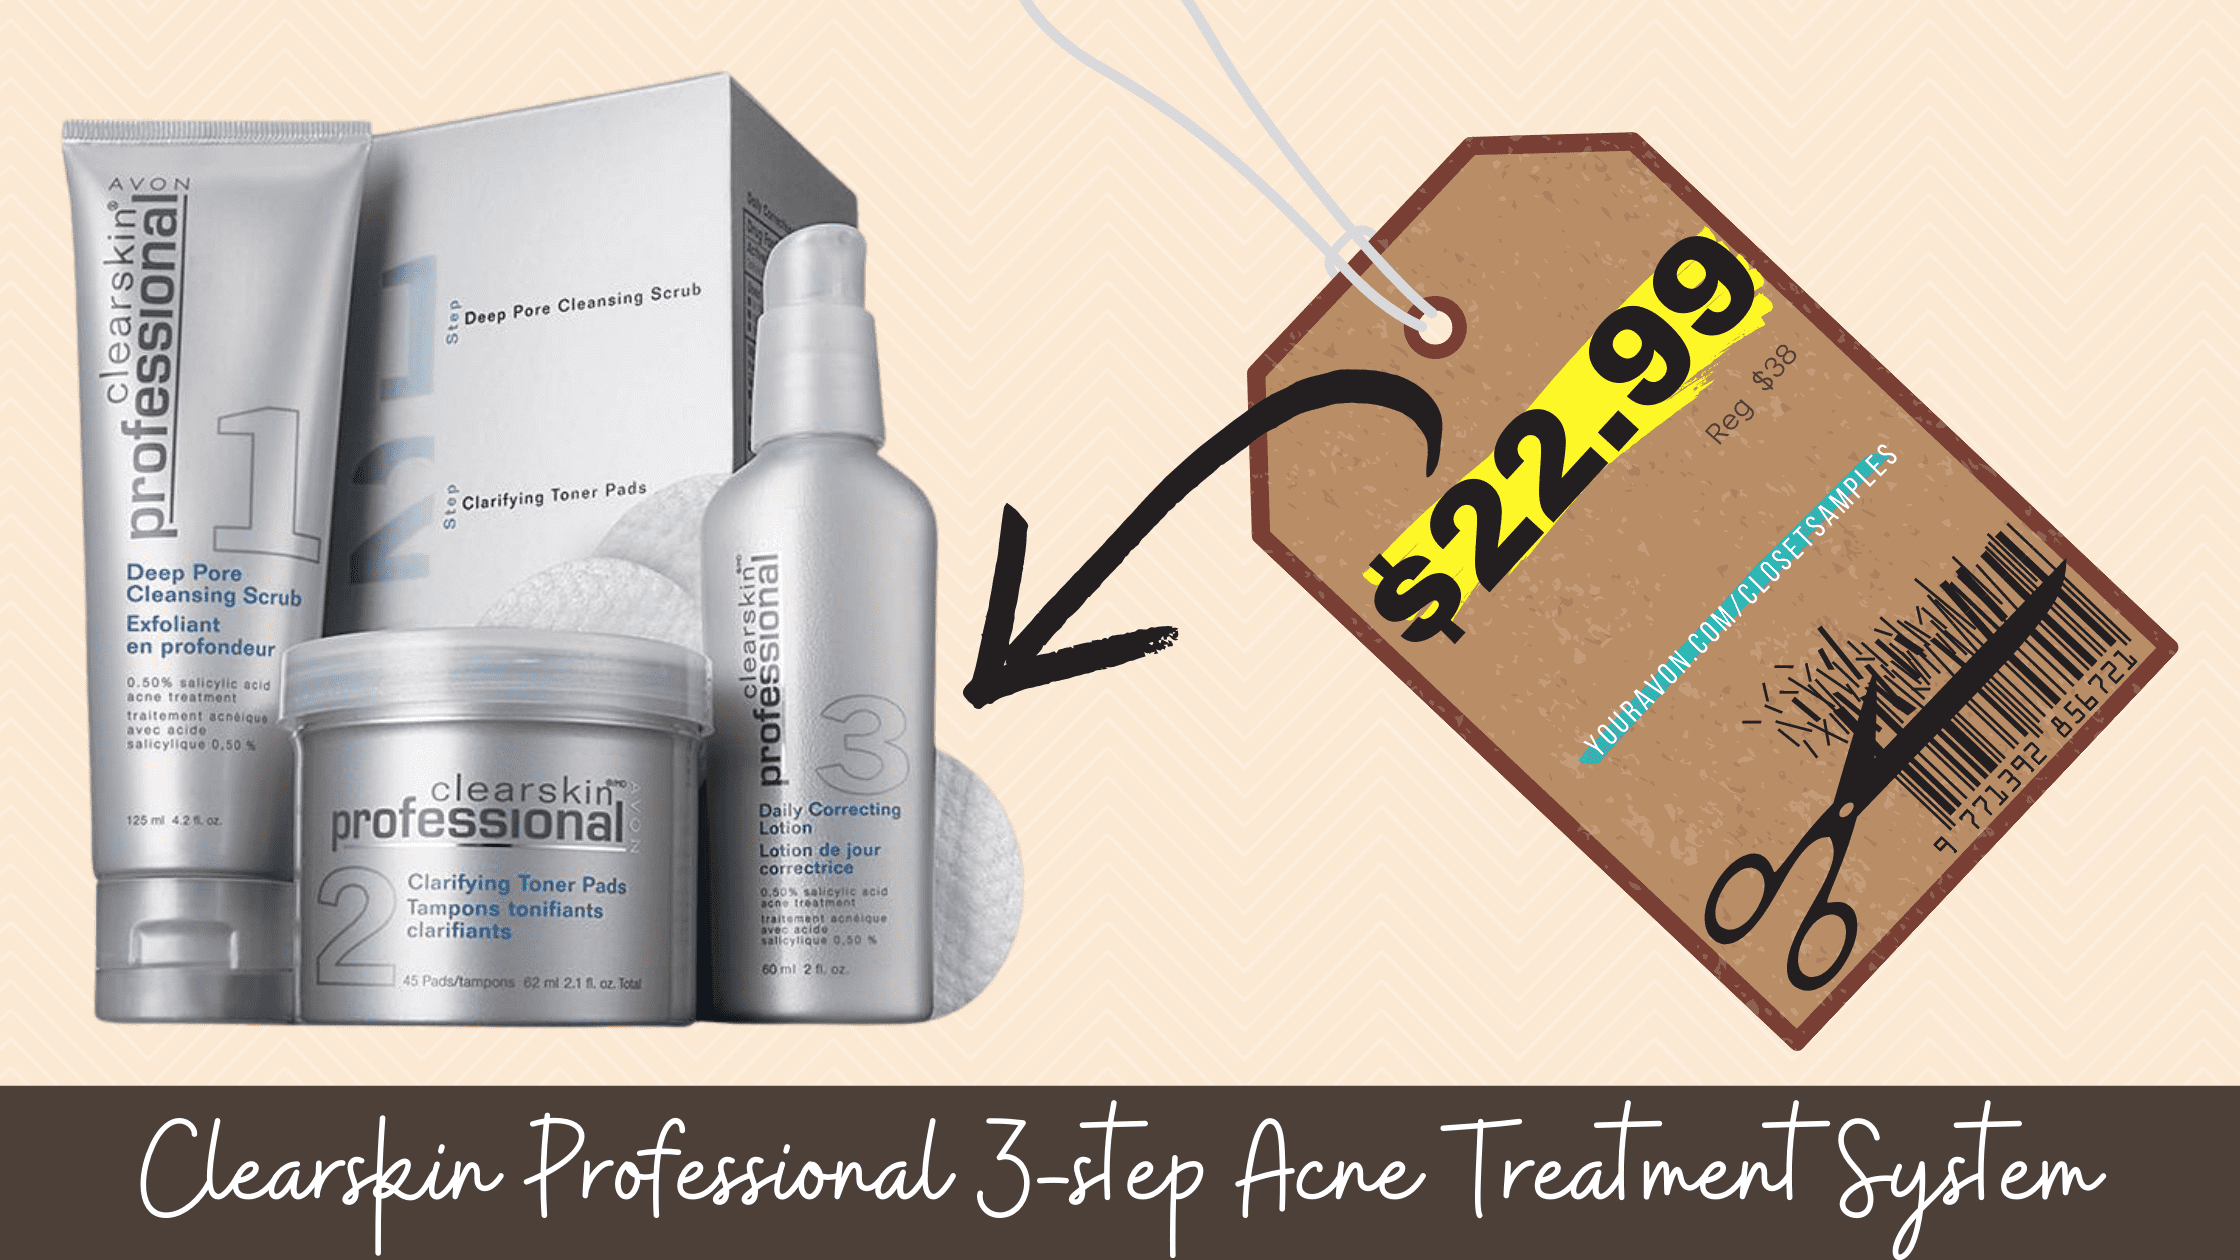 Clearskin-Professional-3step-Acne-Treatment-System-avon-closetsamples.png